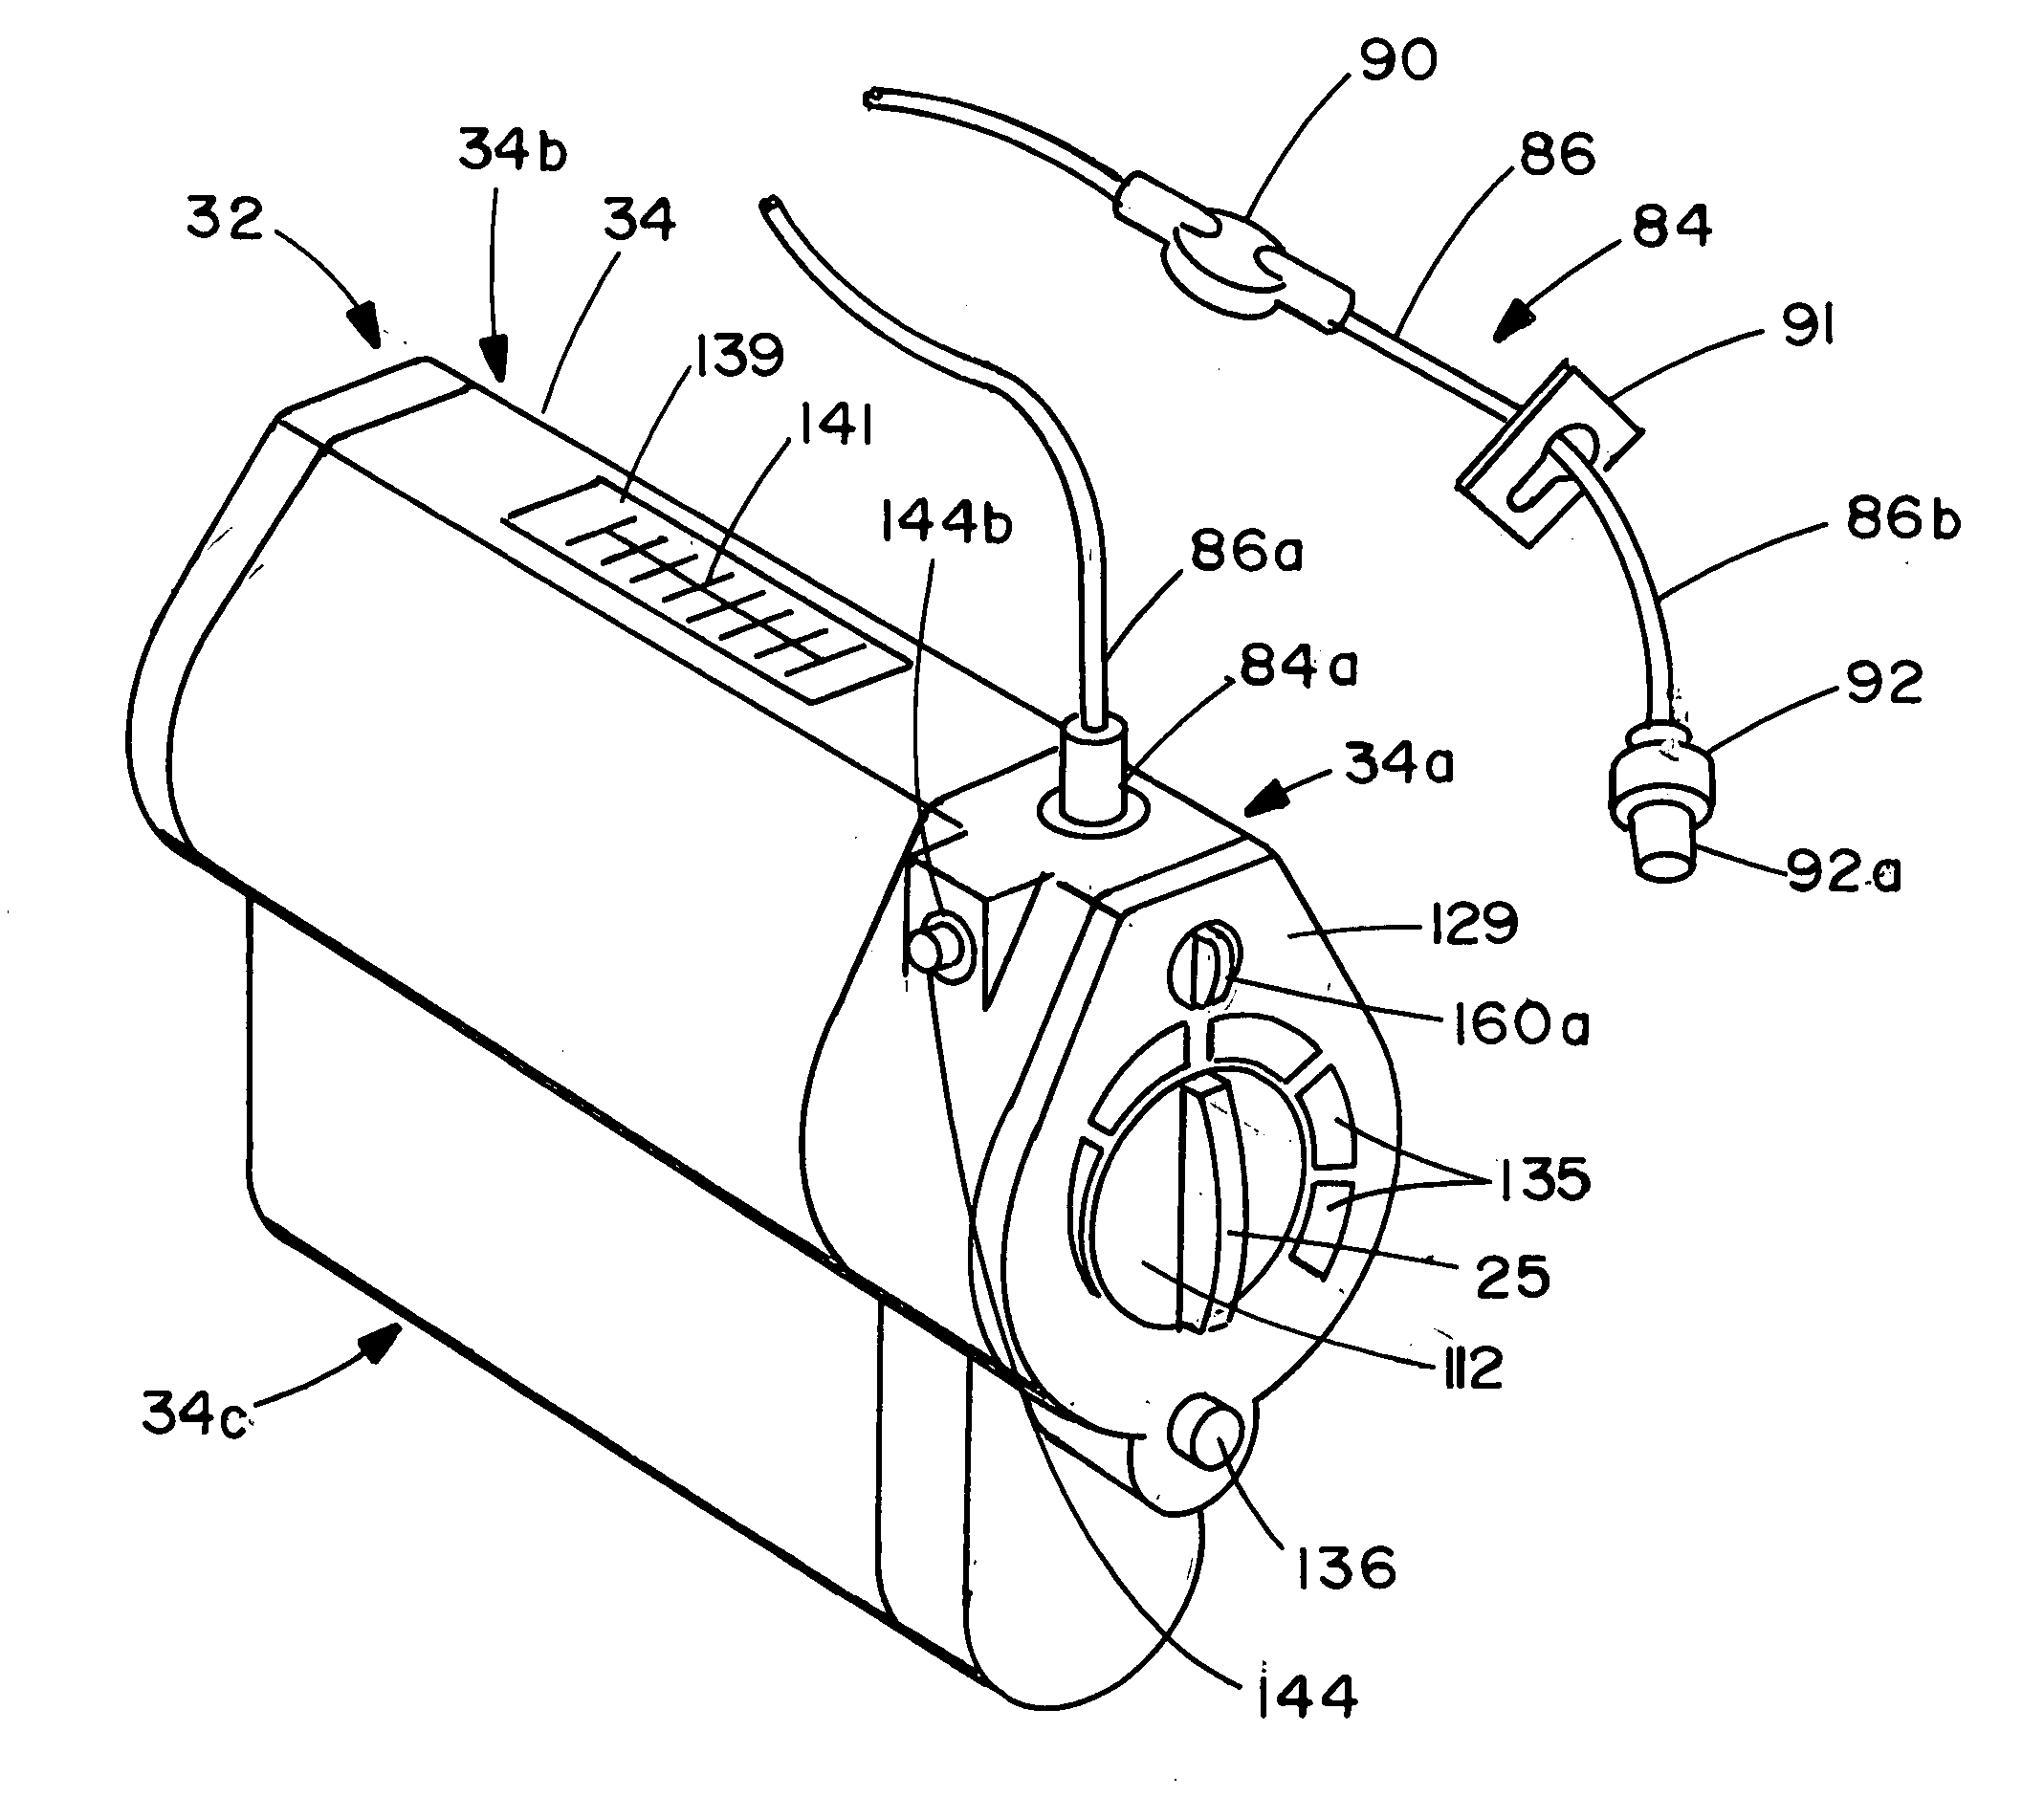 Infusion apparatus with modulated flow control